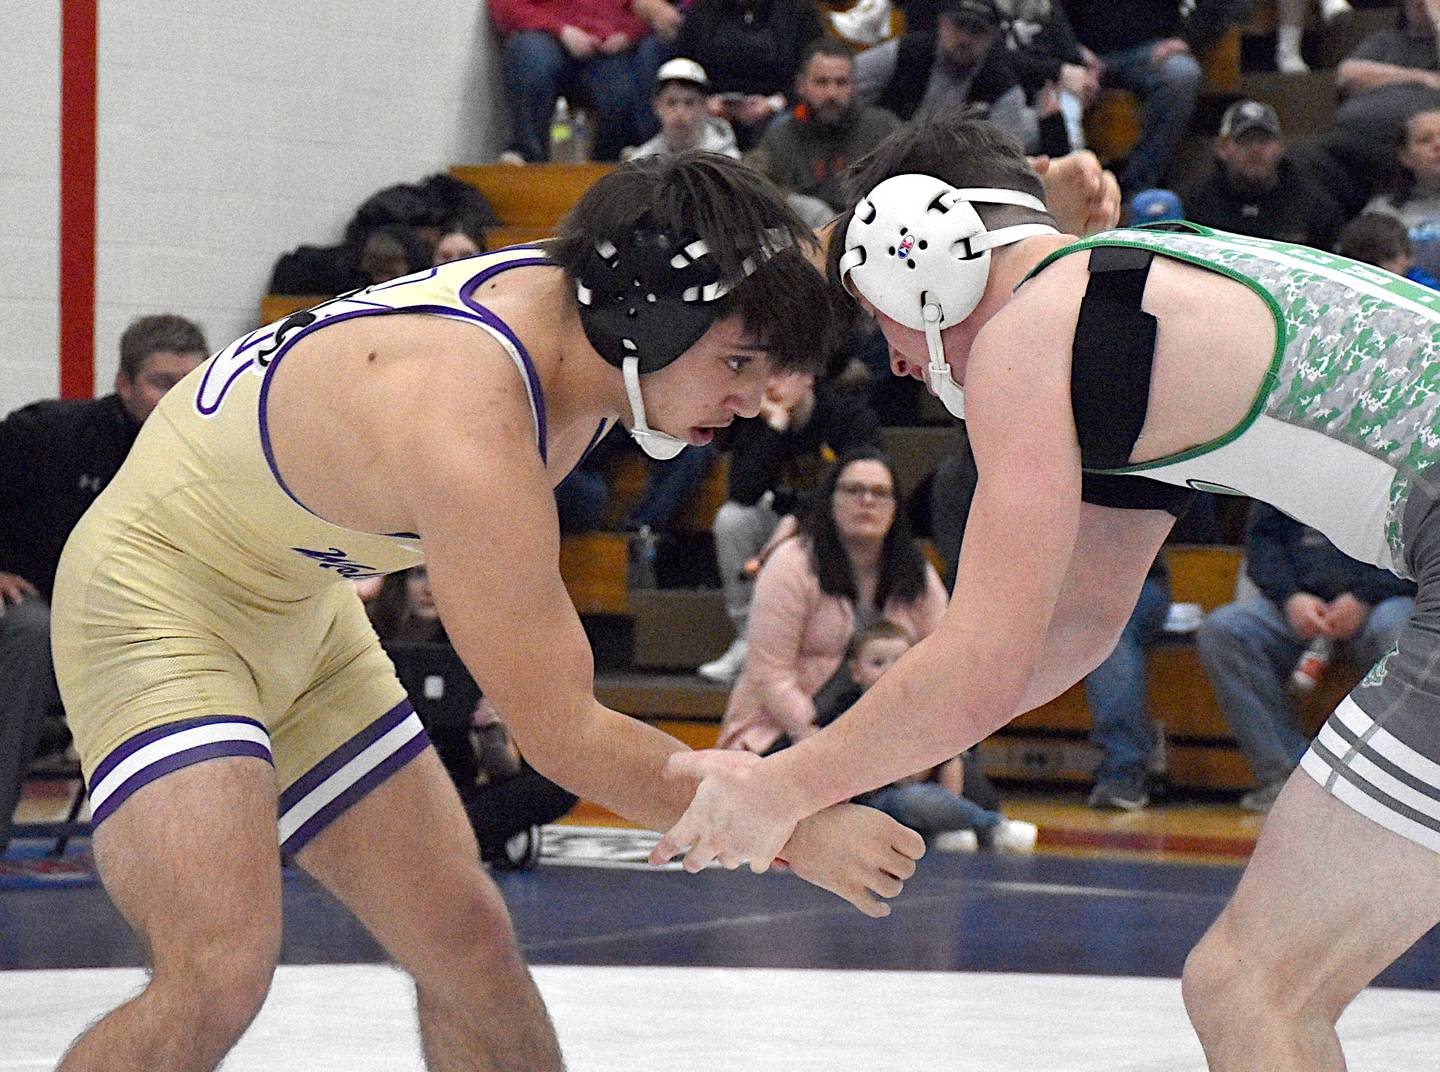 Carmine Shaw hand fights with a SEW/MD opponent at the district tournament held Saturday, Feb. 10 at Interstate 35.